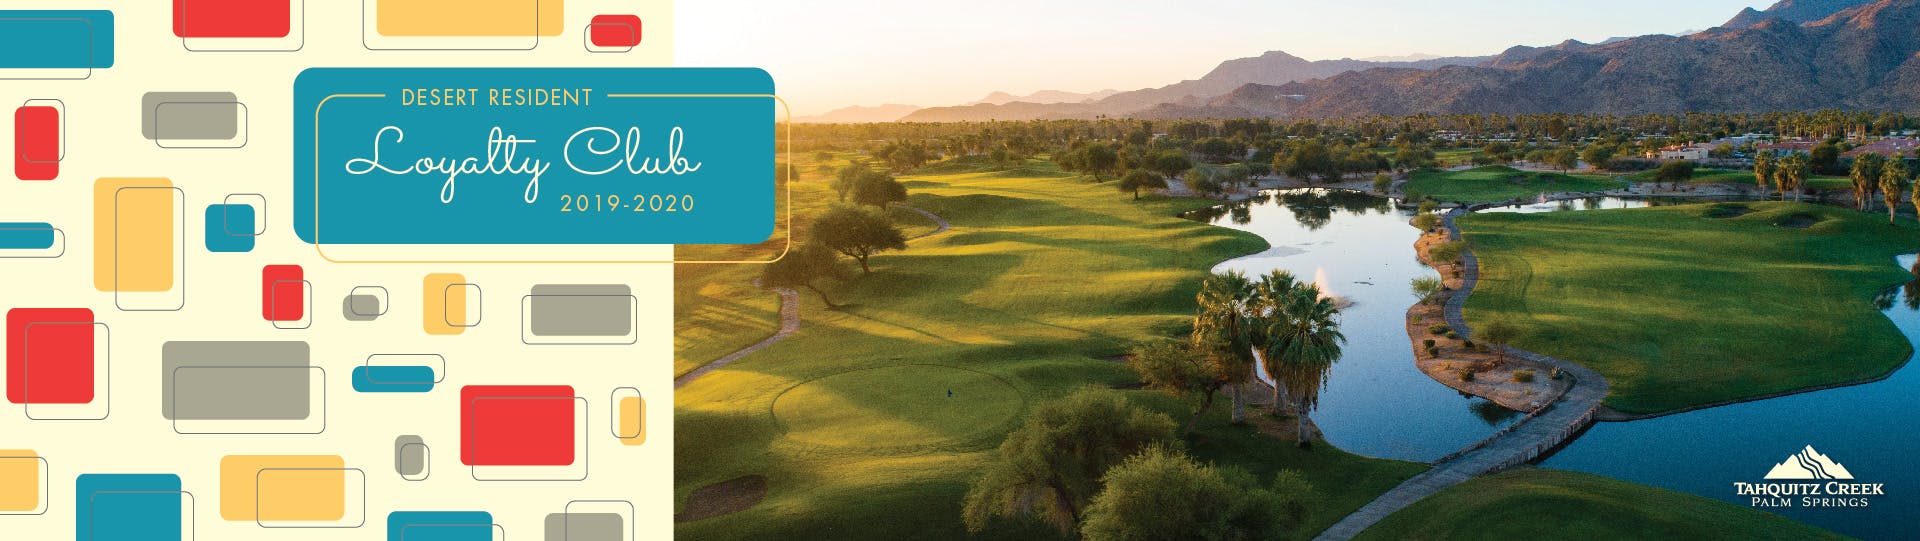 Desert Resident Loyalty Club 2019-2020 graphics and a view of the Resort Course.